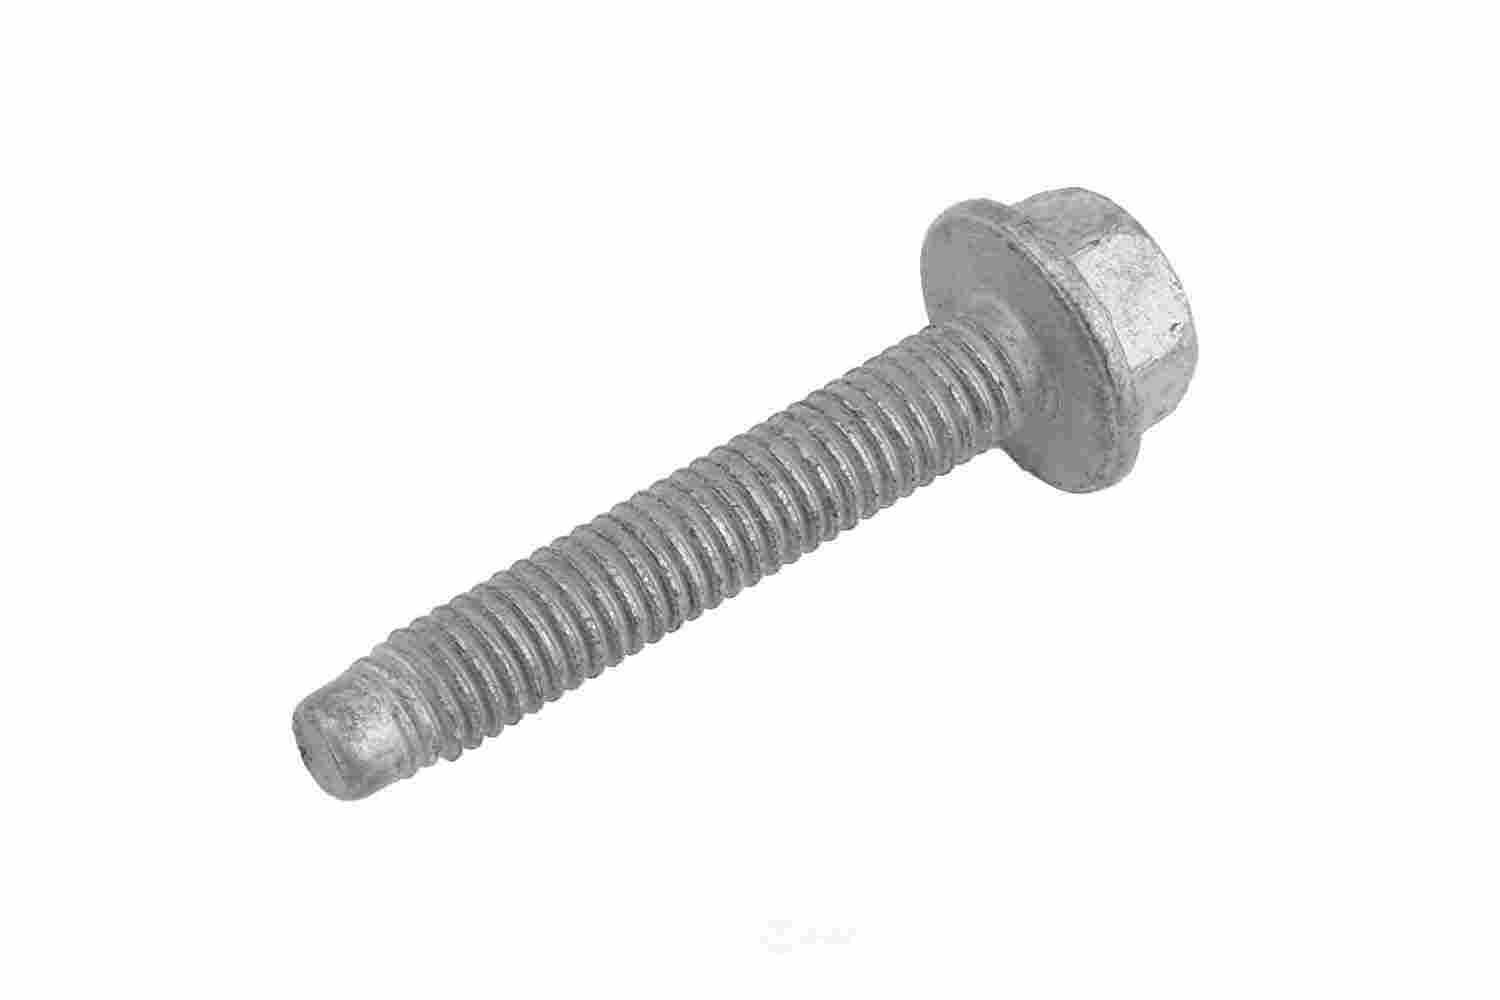 GM GENUINE PARTS - Engine Timing Chain Tensioner Bolt - GMP 11547739